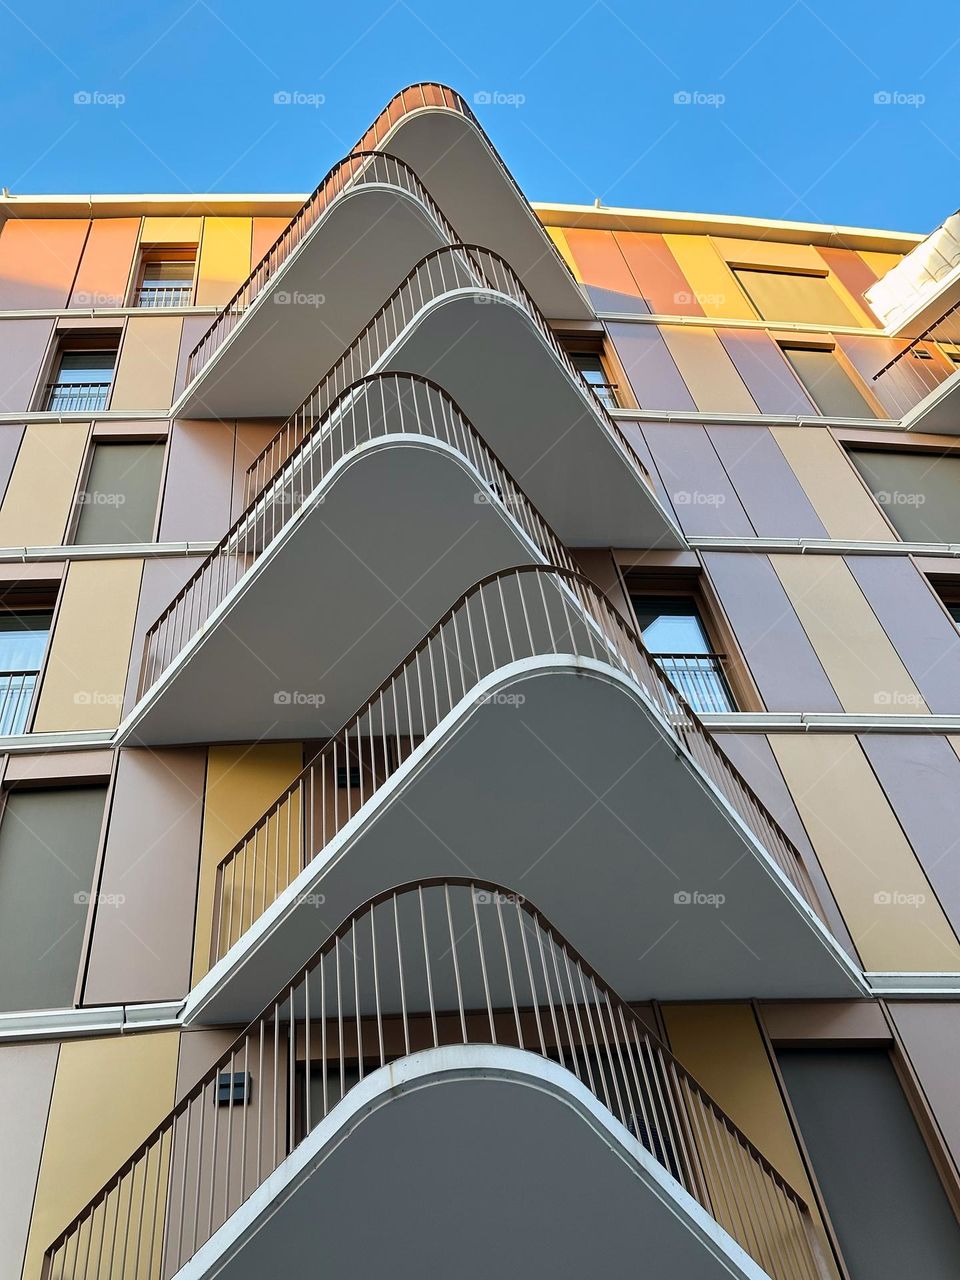 Triangle balconies of a modern building 